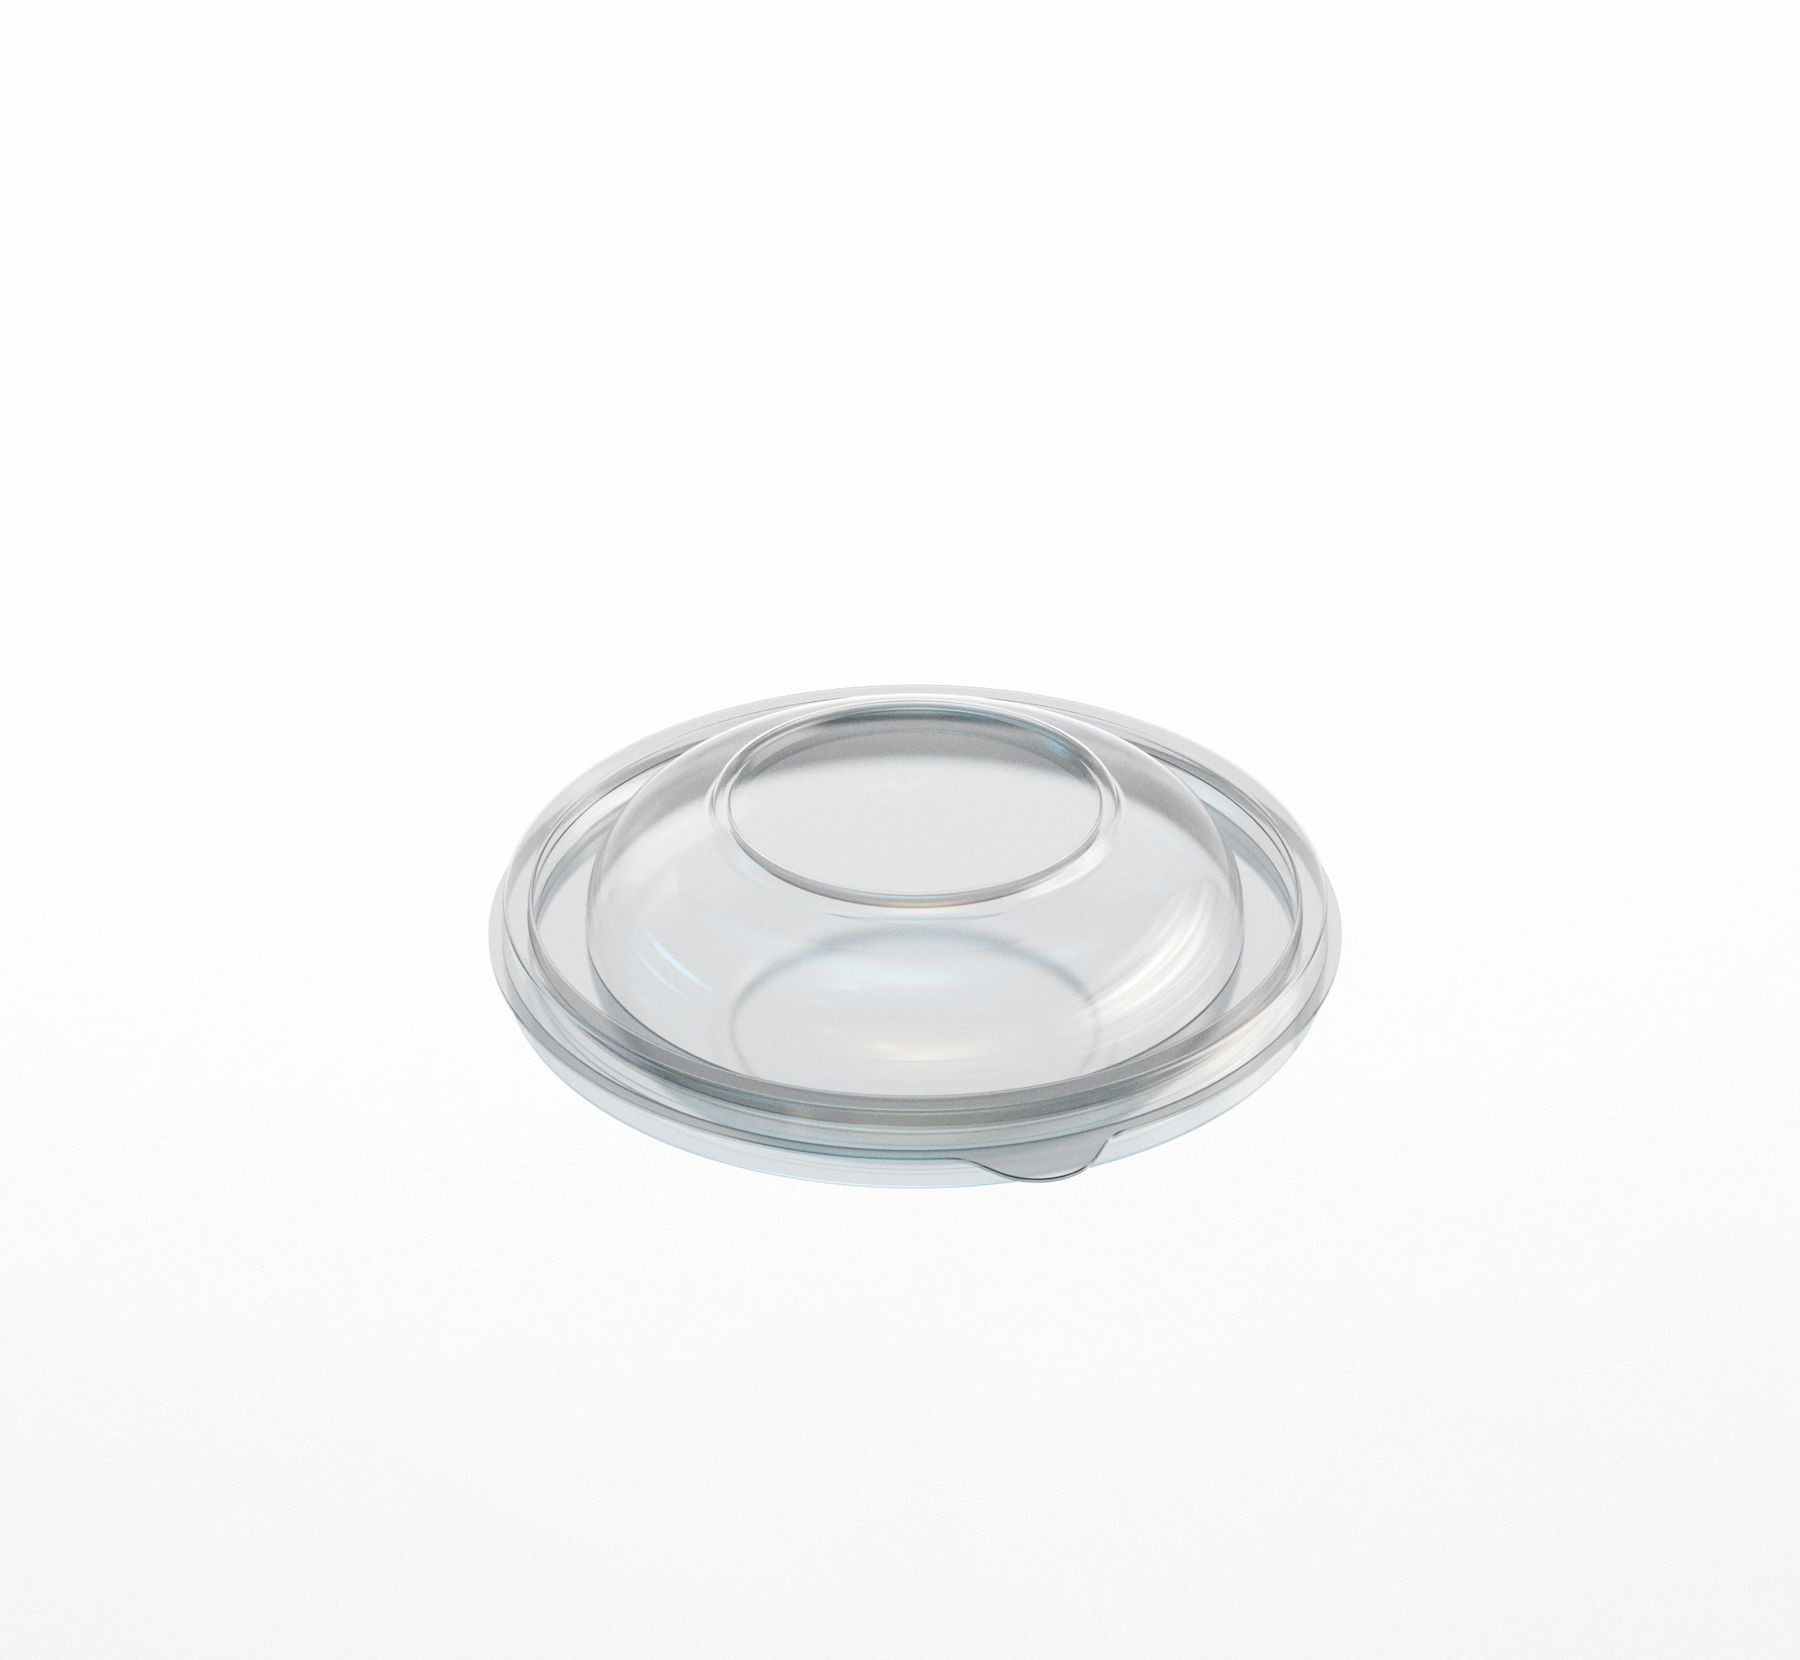 Yocup Company: YOCUP Clear Flat Lid For 16 oz 5.5 Plastic Salad Bowl -  300/Case